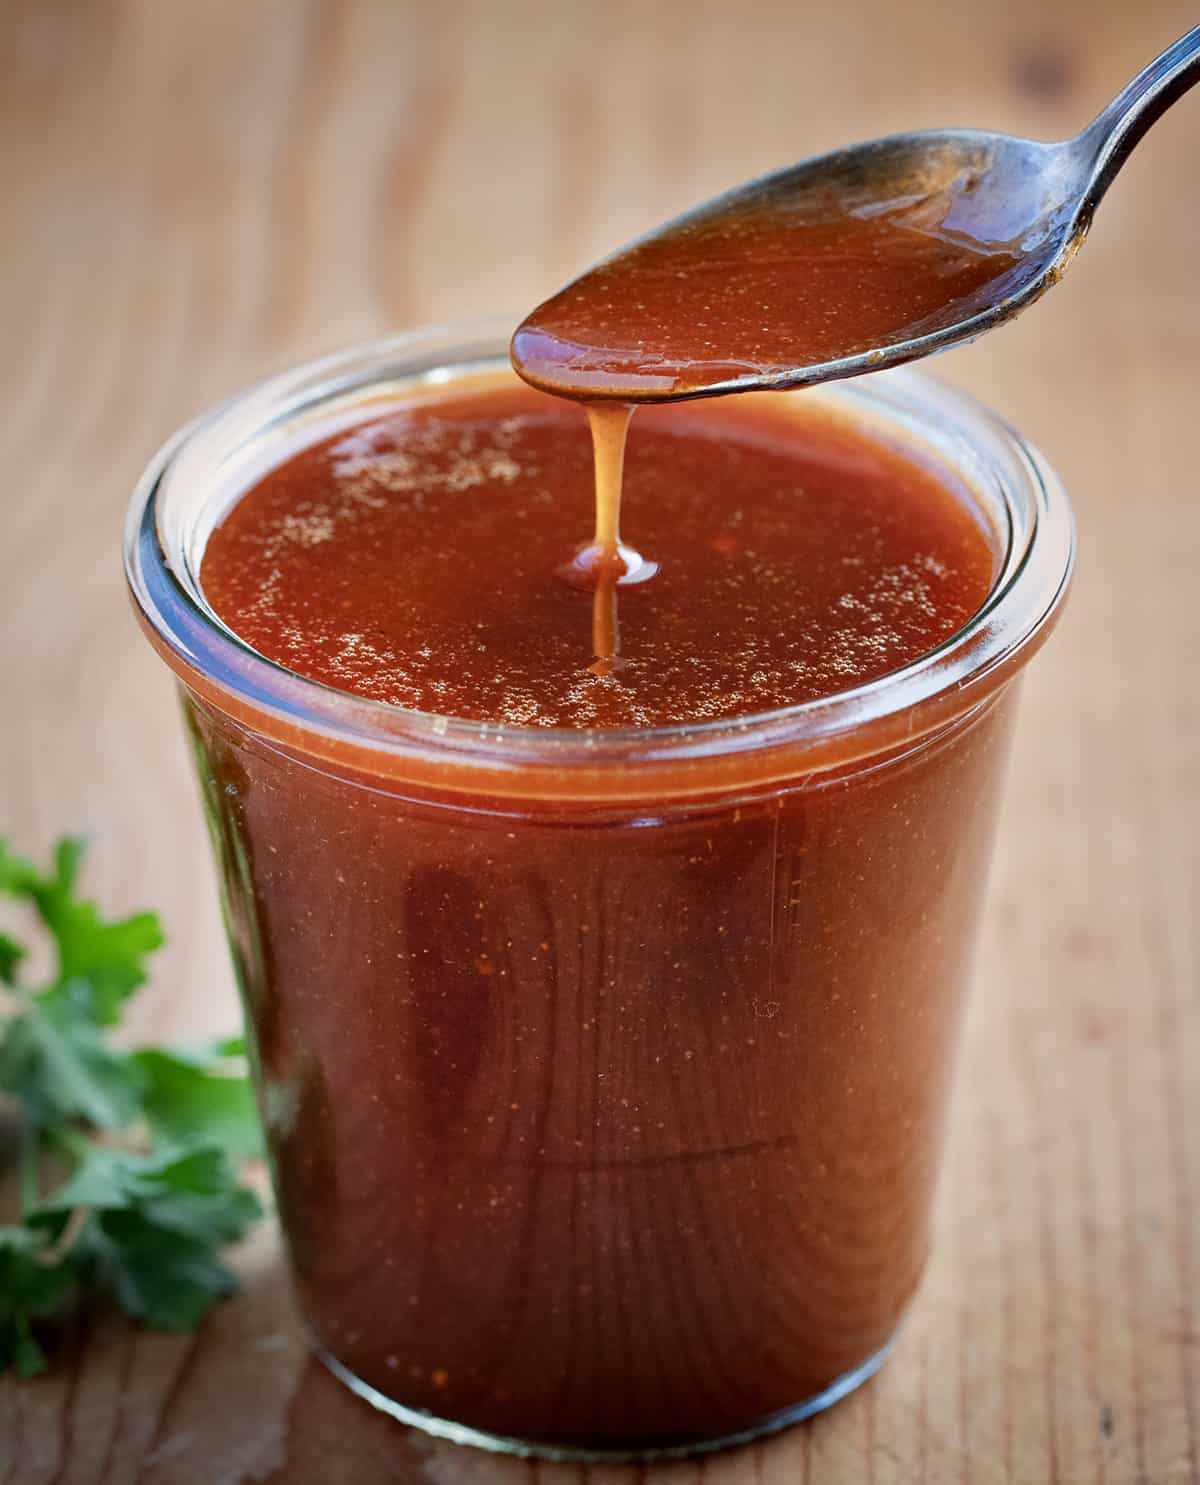 A spoon dipping into a jar of Firecracker Sauce on a wooden table.